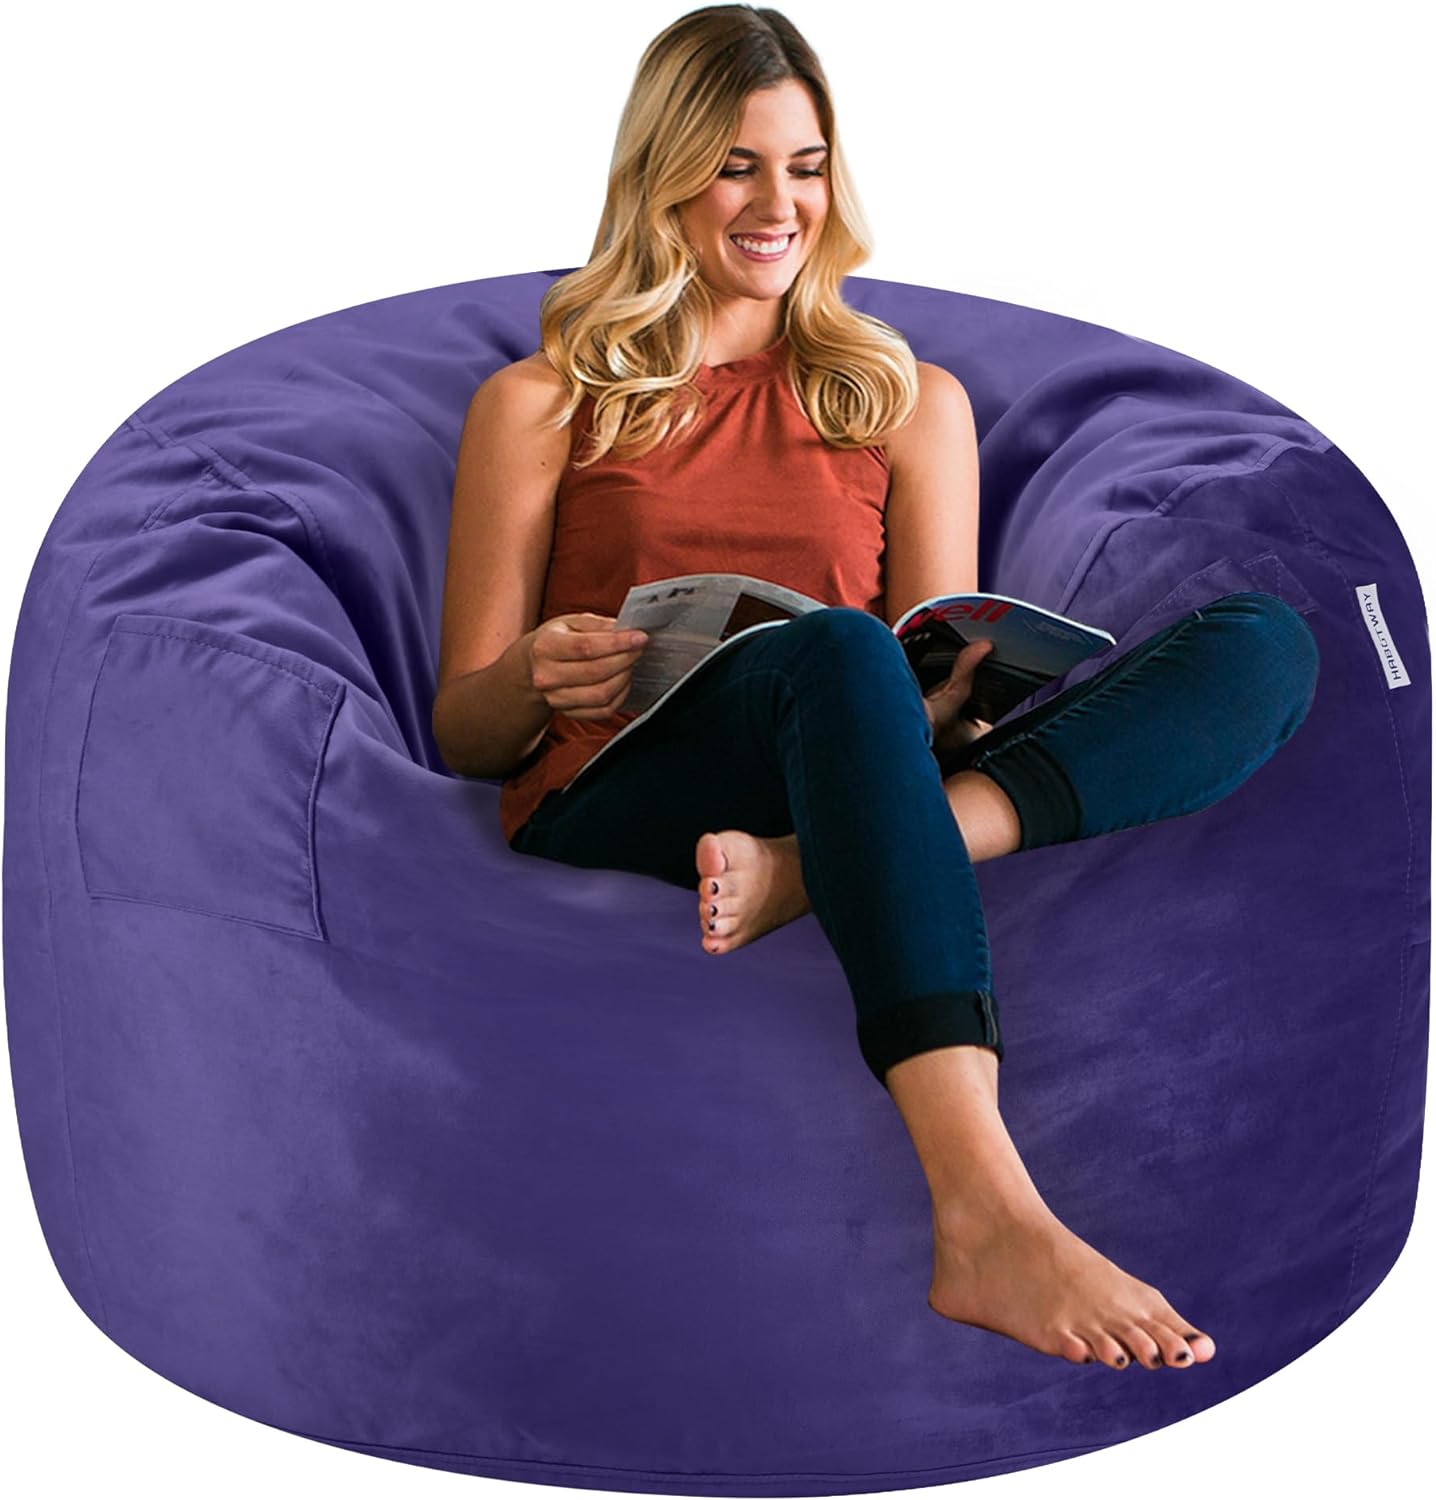 HABUTWAY Bean Bag Chair 3Ft Luxurious Velvet Ultra Soft Fur with High-Rebound Memory Foam Bean Bag Chairs for Adults Plush Lazy Sofa with Fluffy Removable Sponge 3'(Purple)